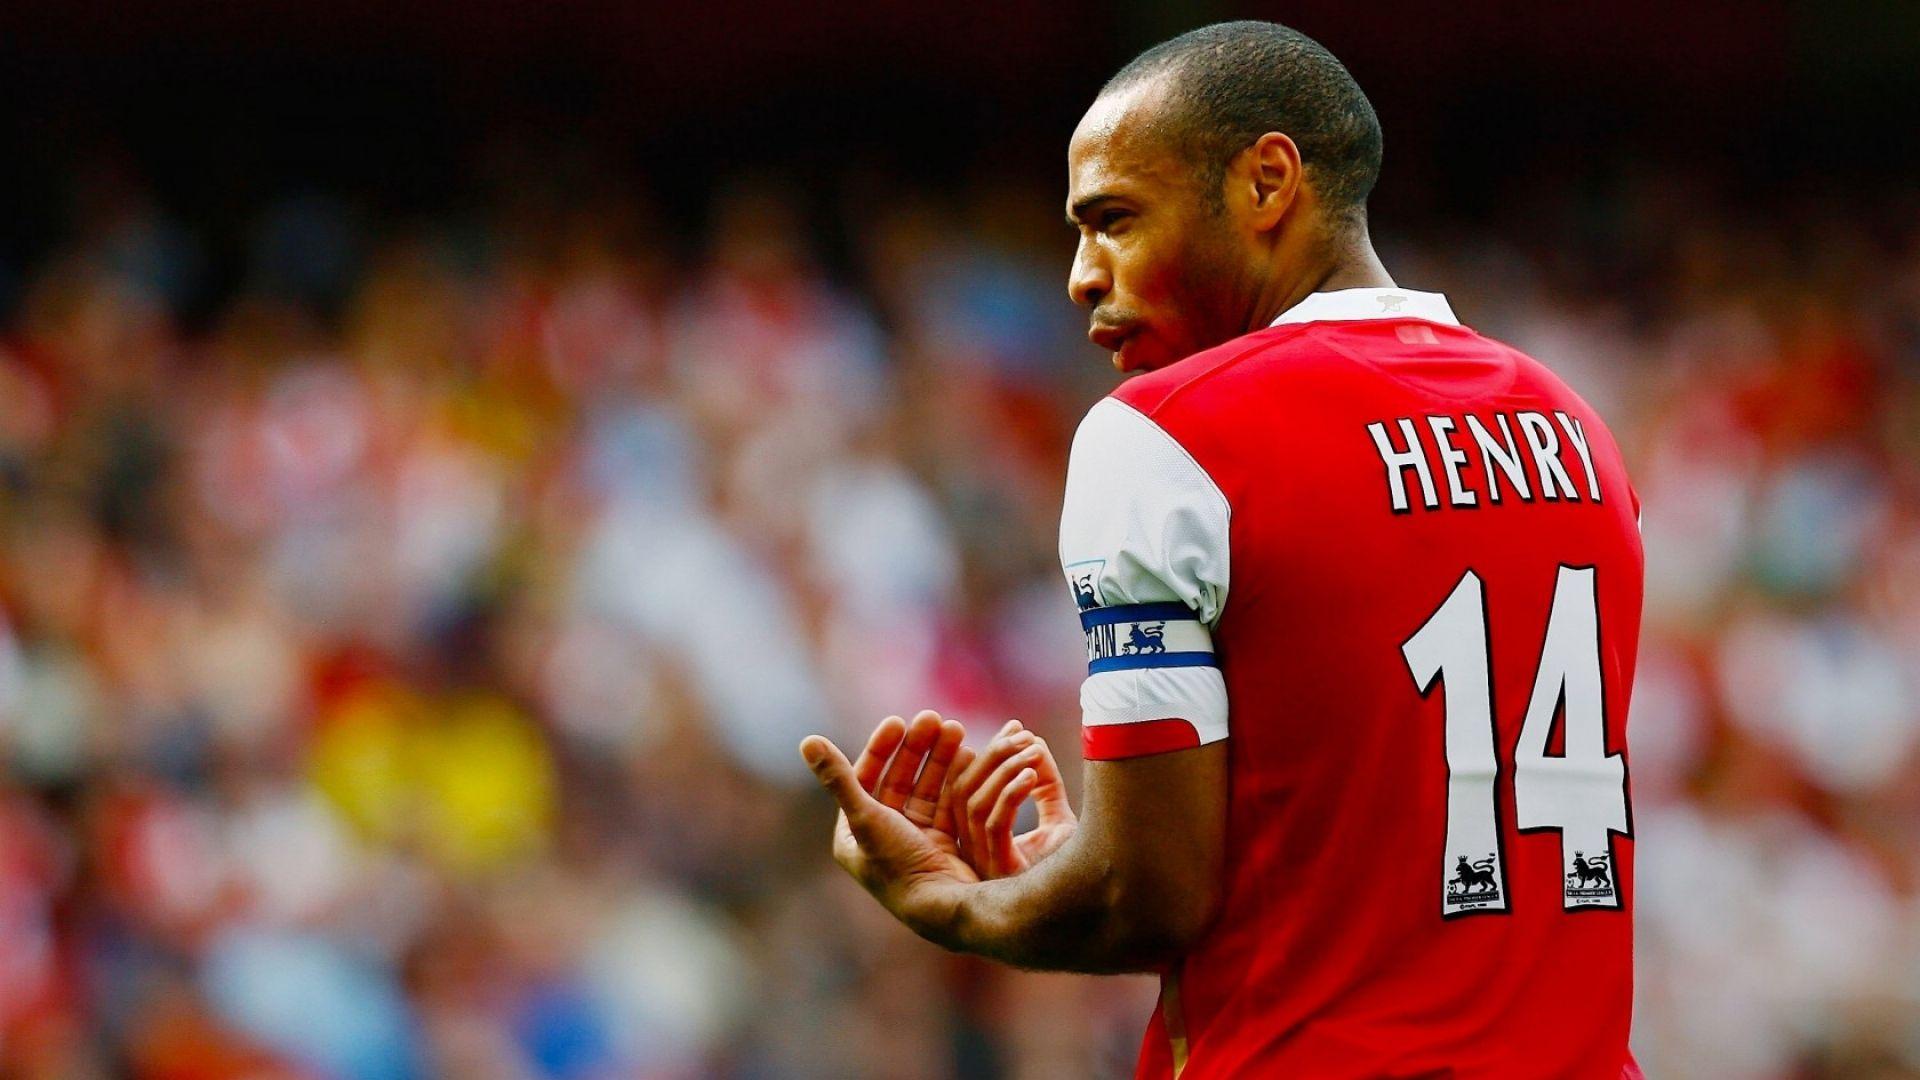 Download Wallpaper 1920x1080 thierry henry, henry, arsenal, england